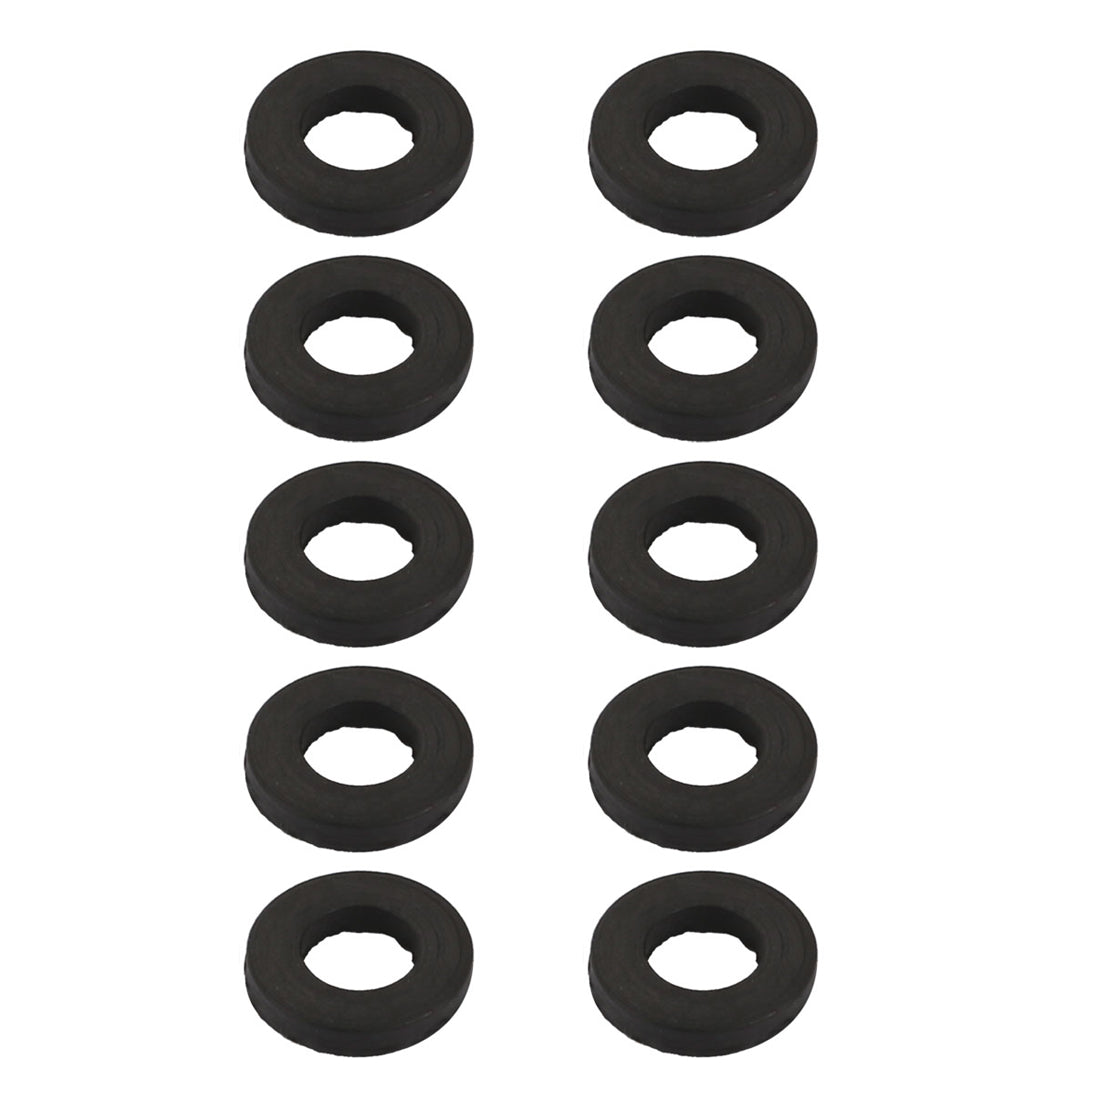 uxcell Uxcell 10pcs Black Rubber Round Flat Washer Assortment Size 14x24x3mm Flat Washer